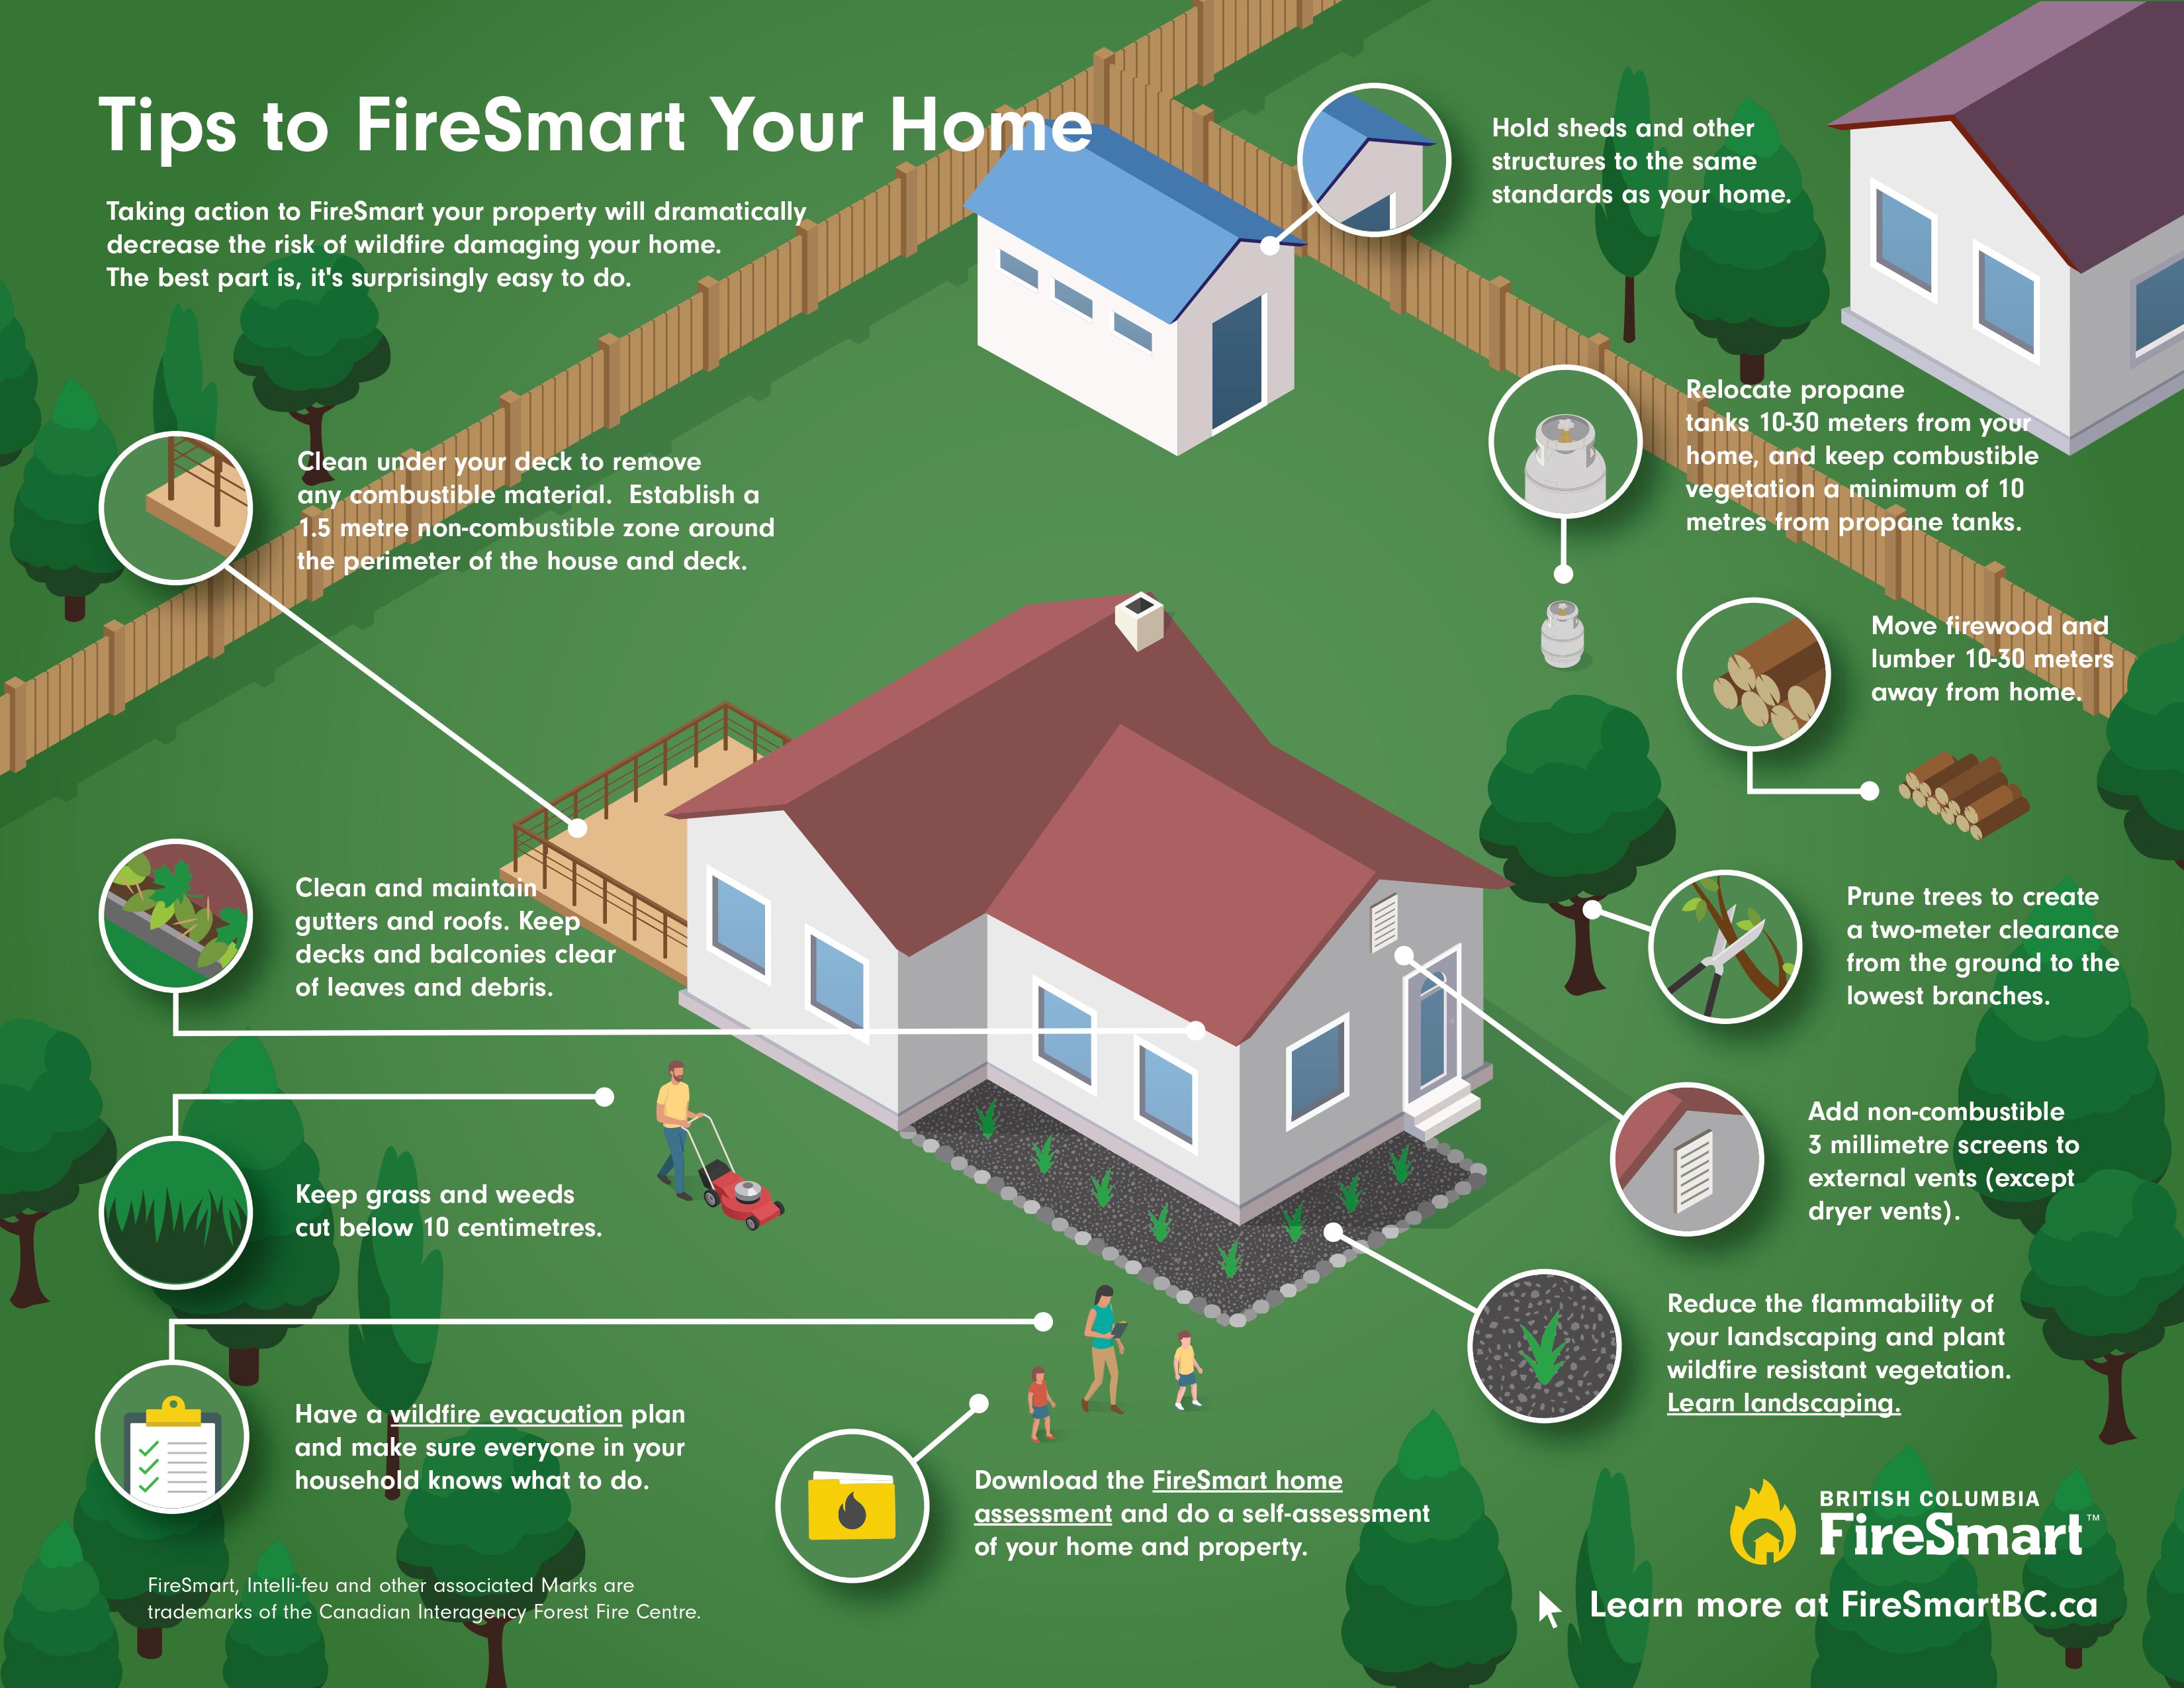 Tips to FireSmart your Home